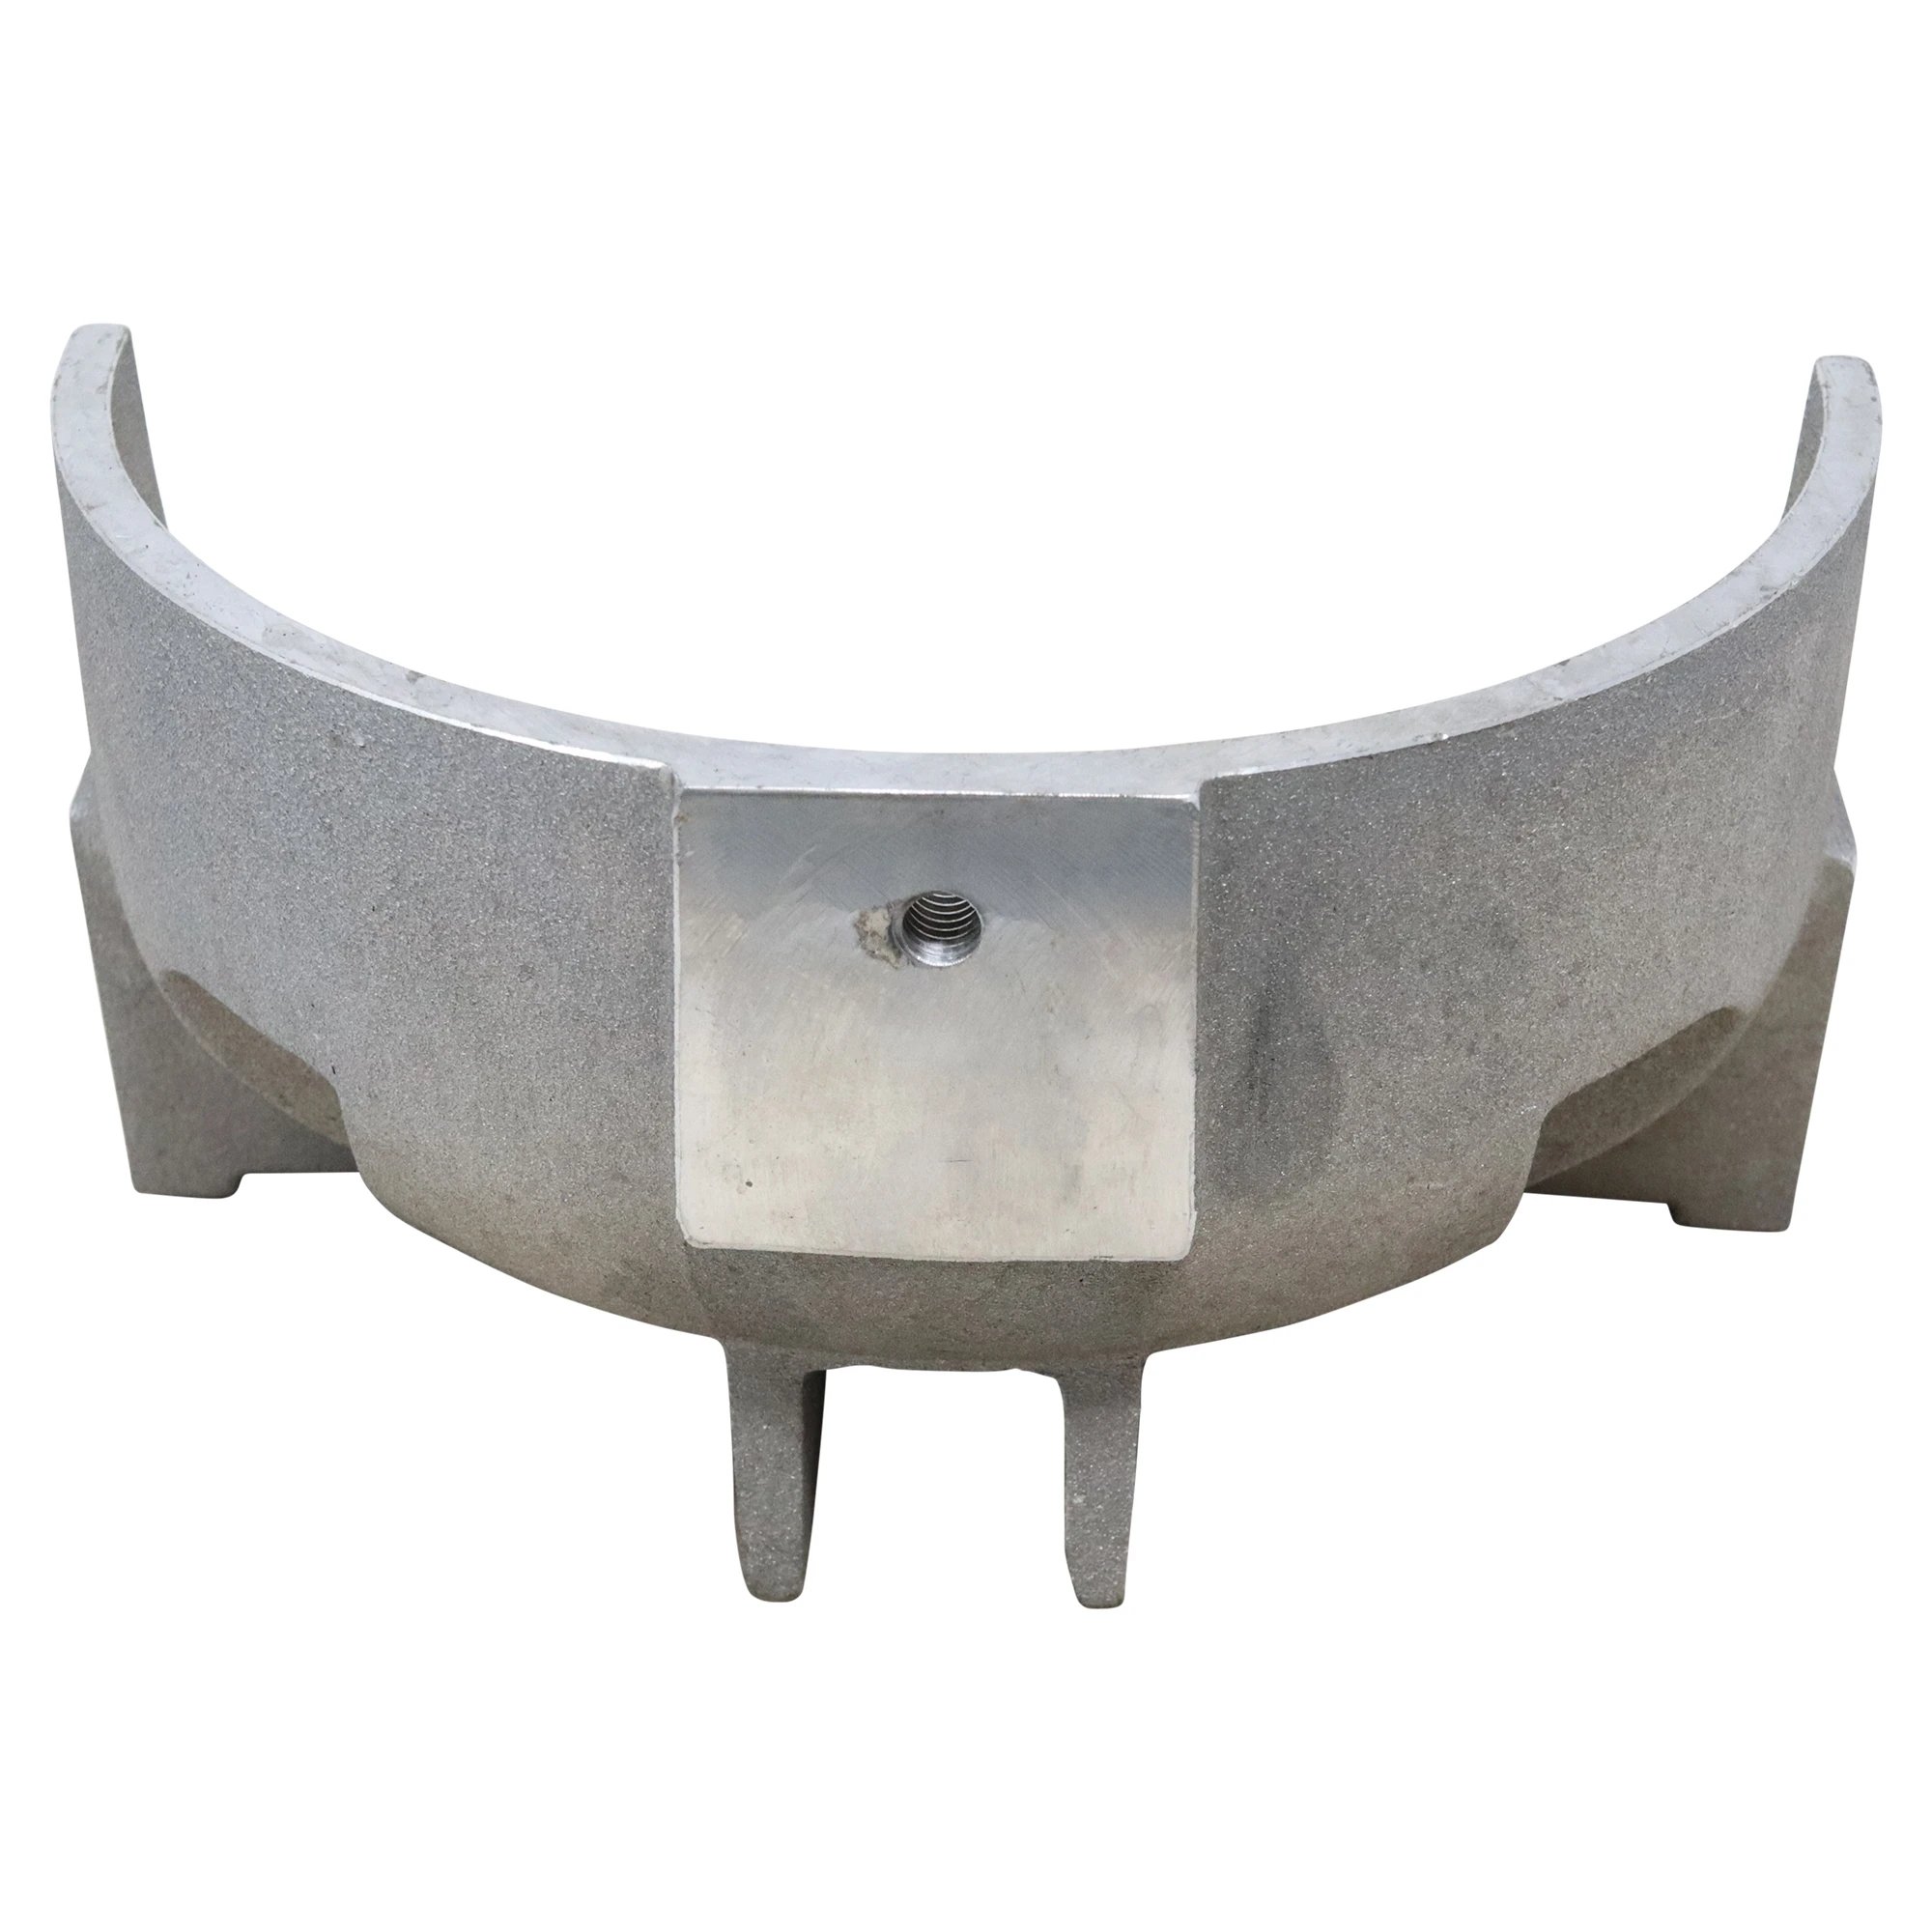 Wastebuilt® Replacement for Leach Bearing Leg